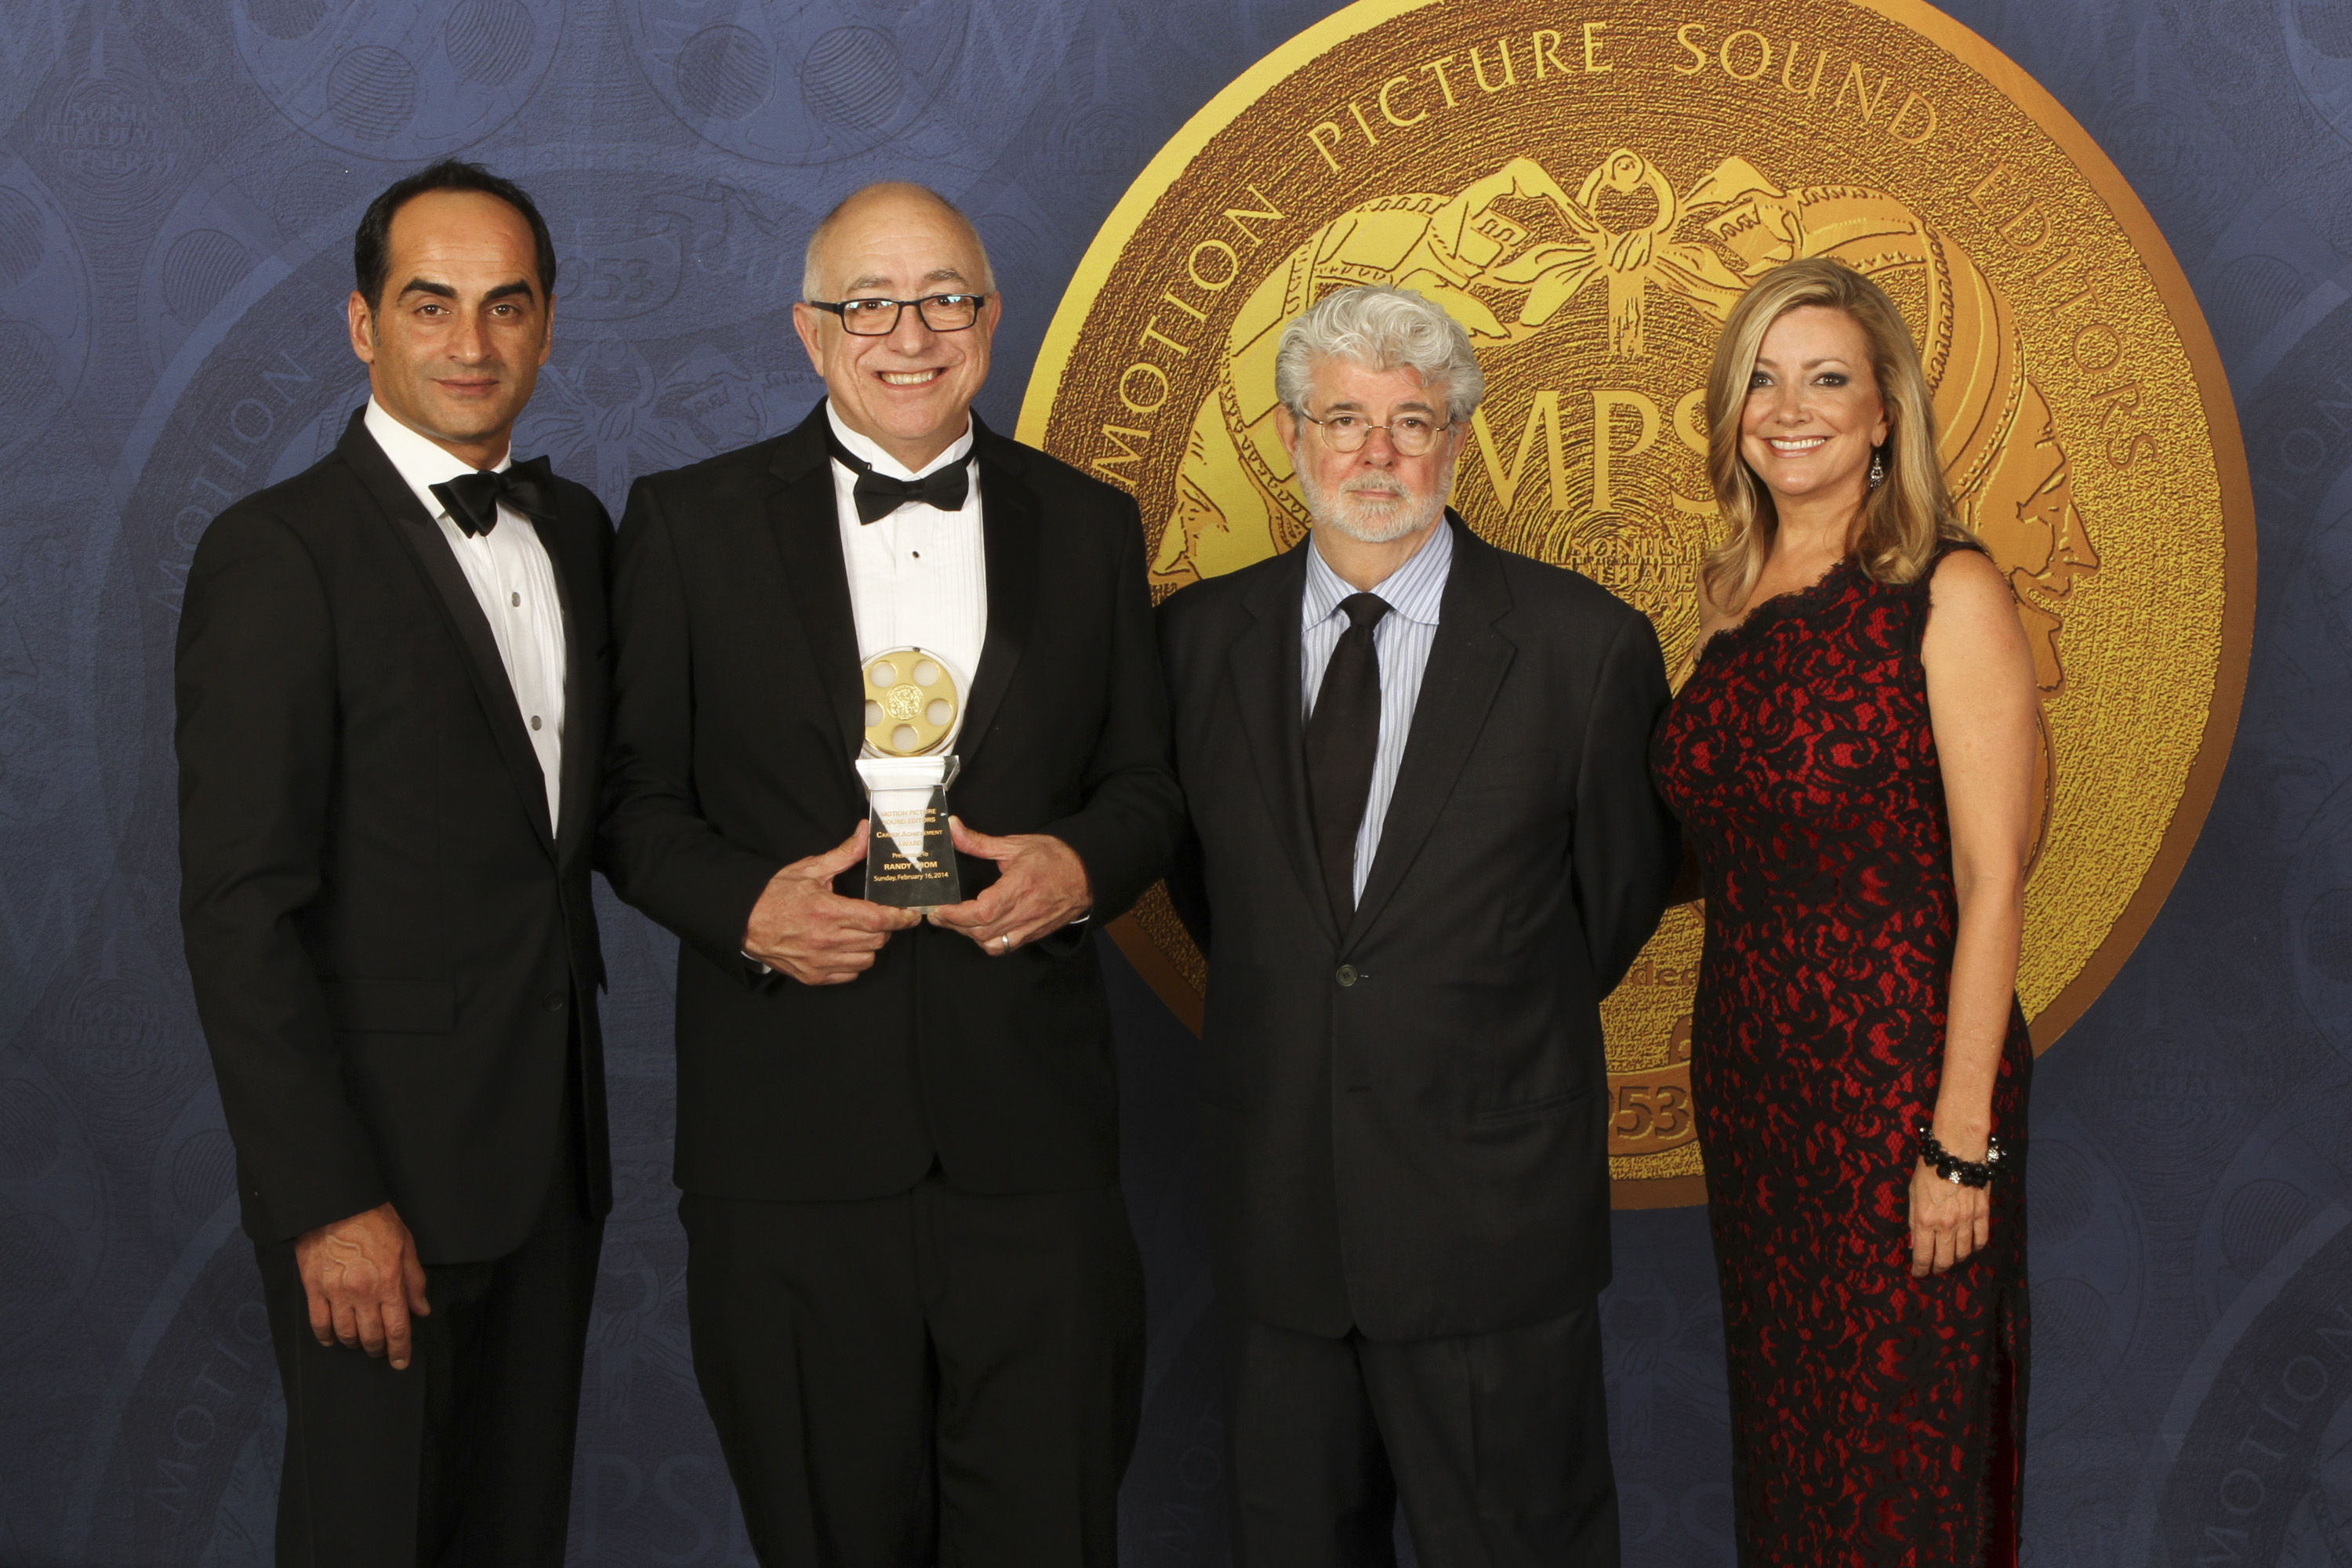 MPSE Golden Reel Awards 2014 with George Lucas, Randy Thom and Navid Negahban